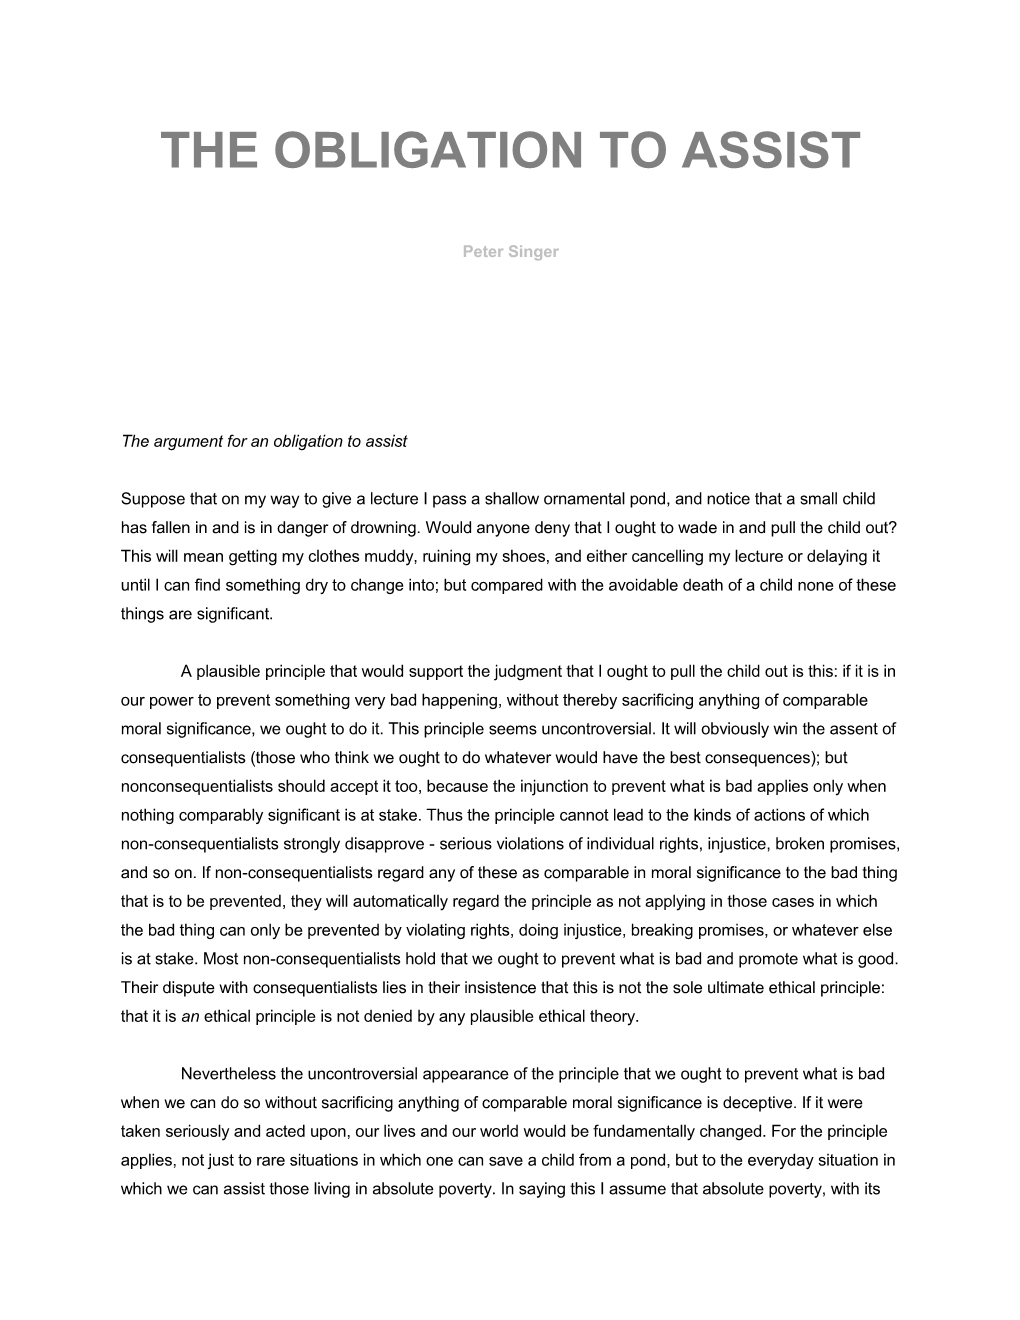 The Obligation to Assist